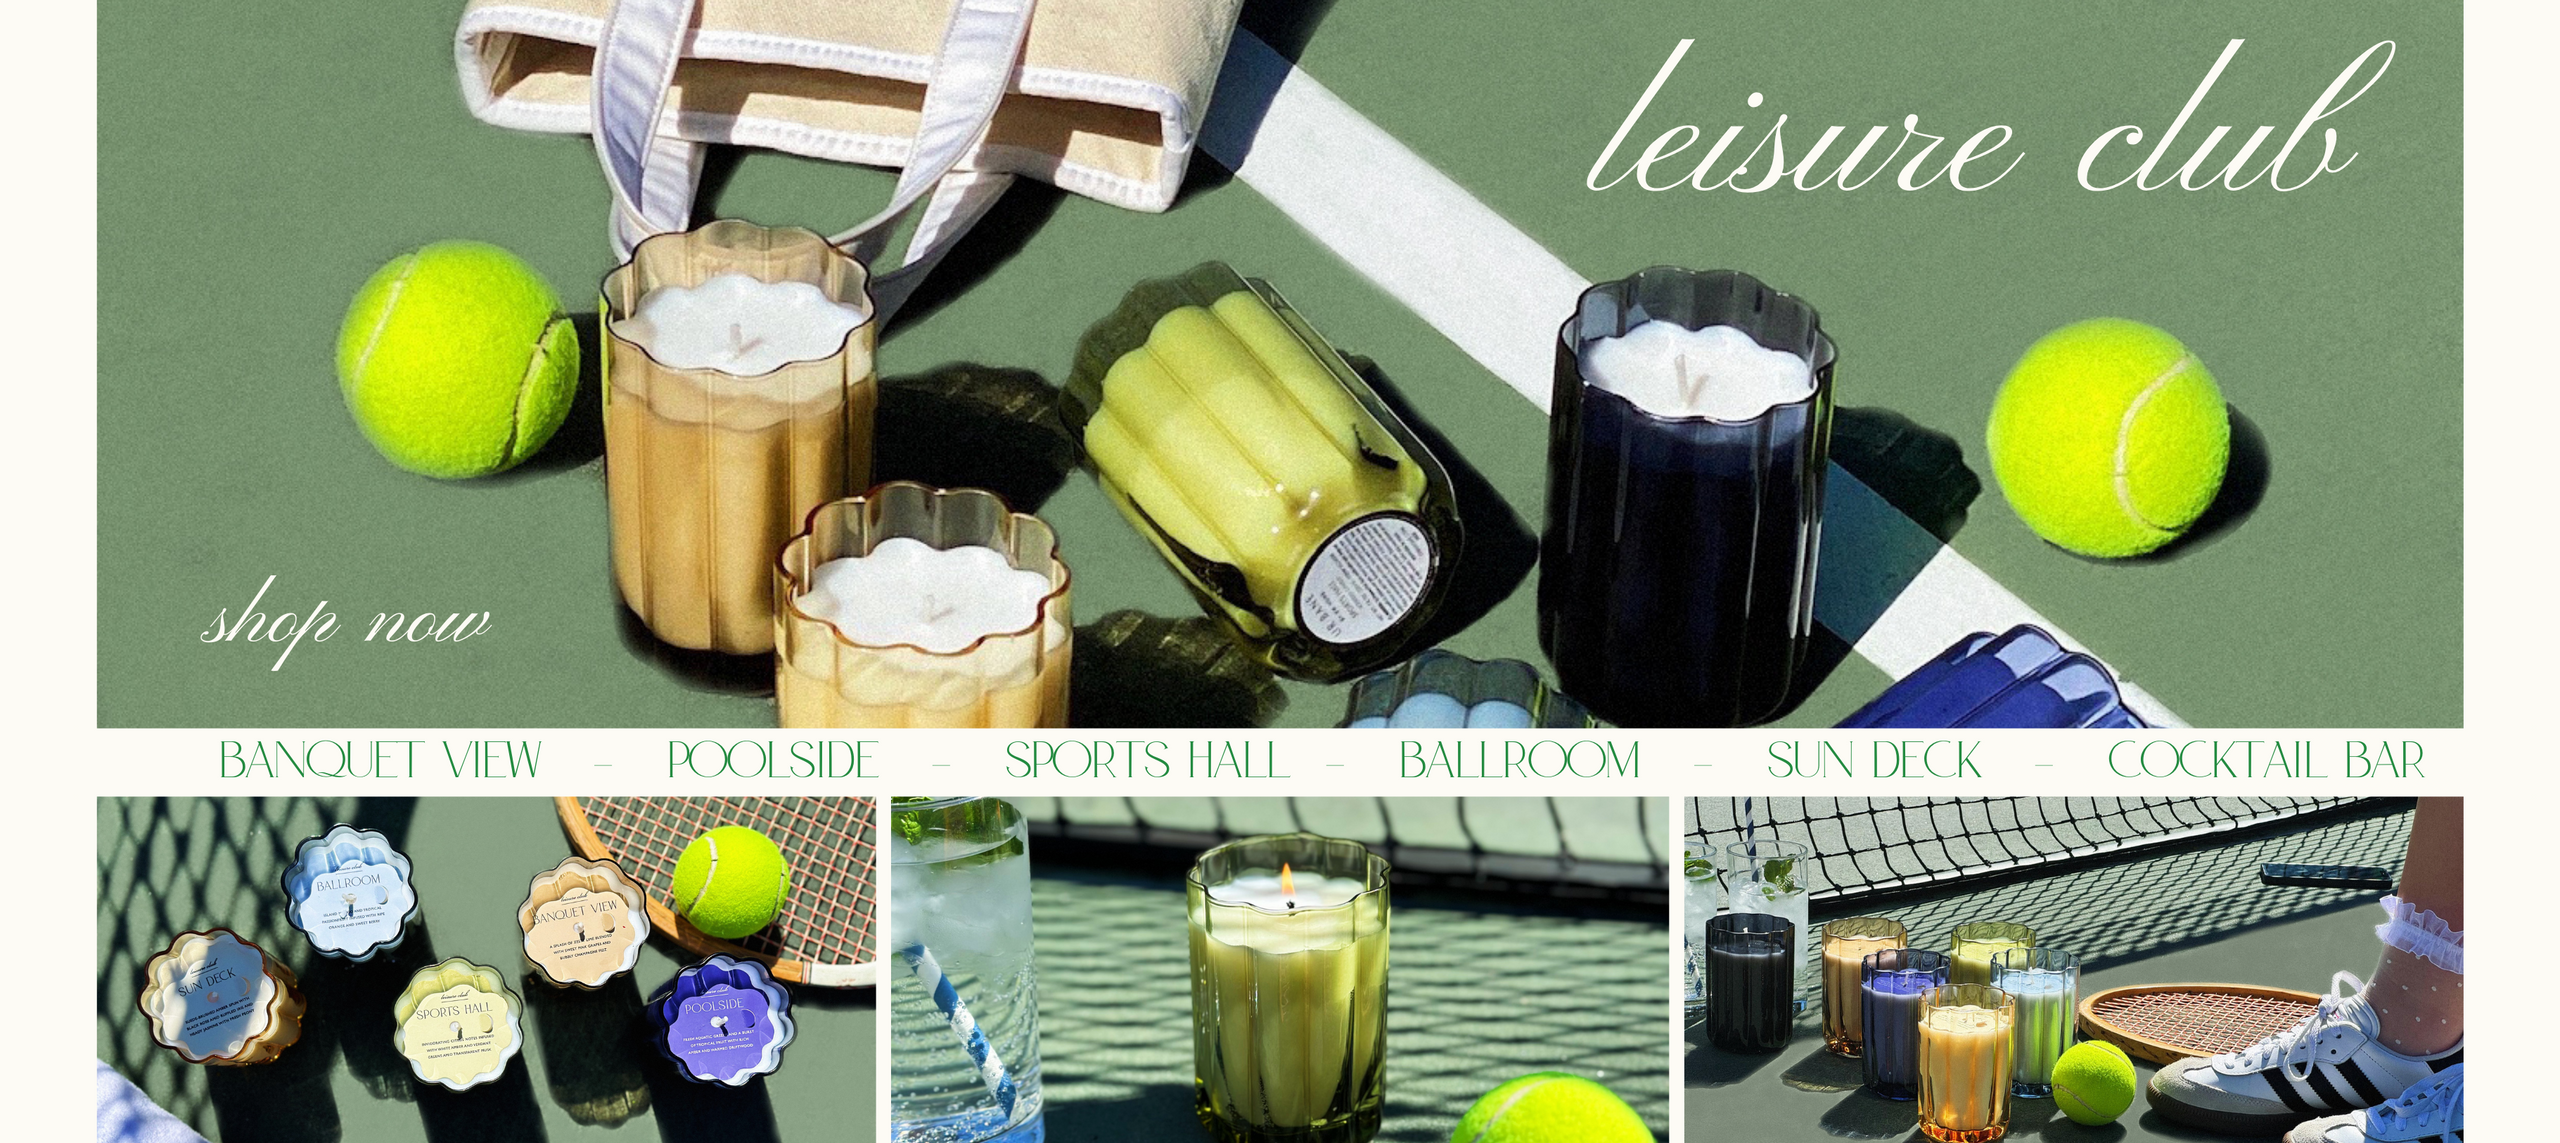 Leisure Club banner image. Country club tennis court